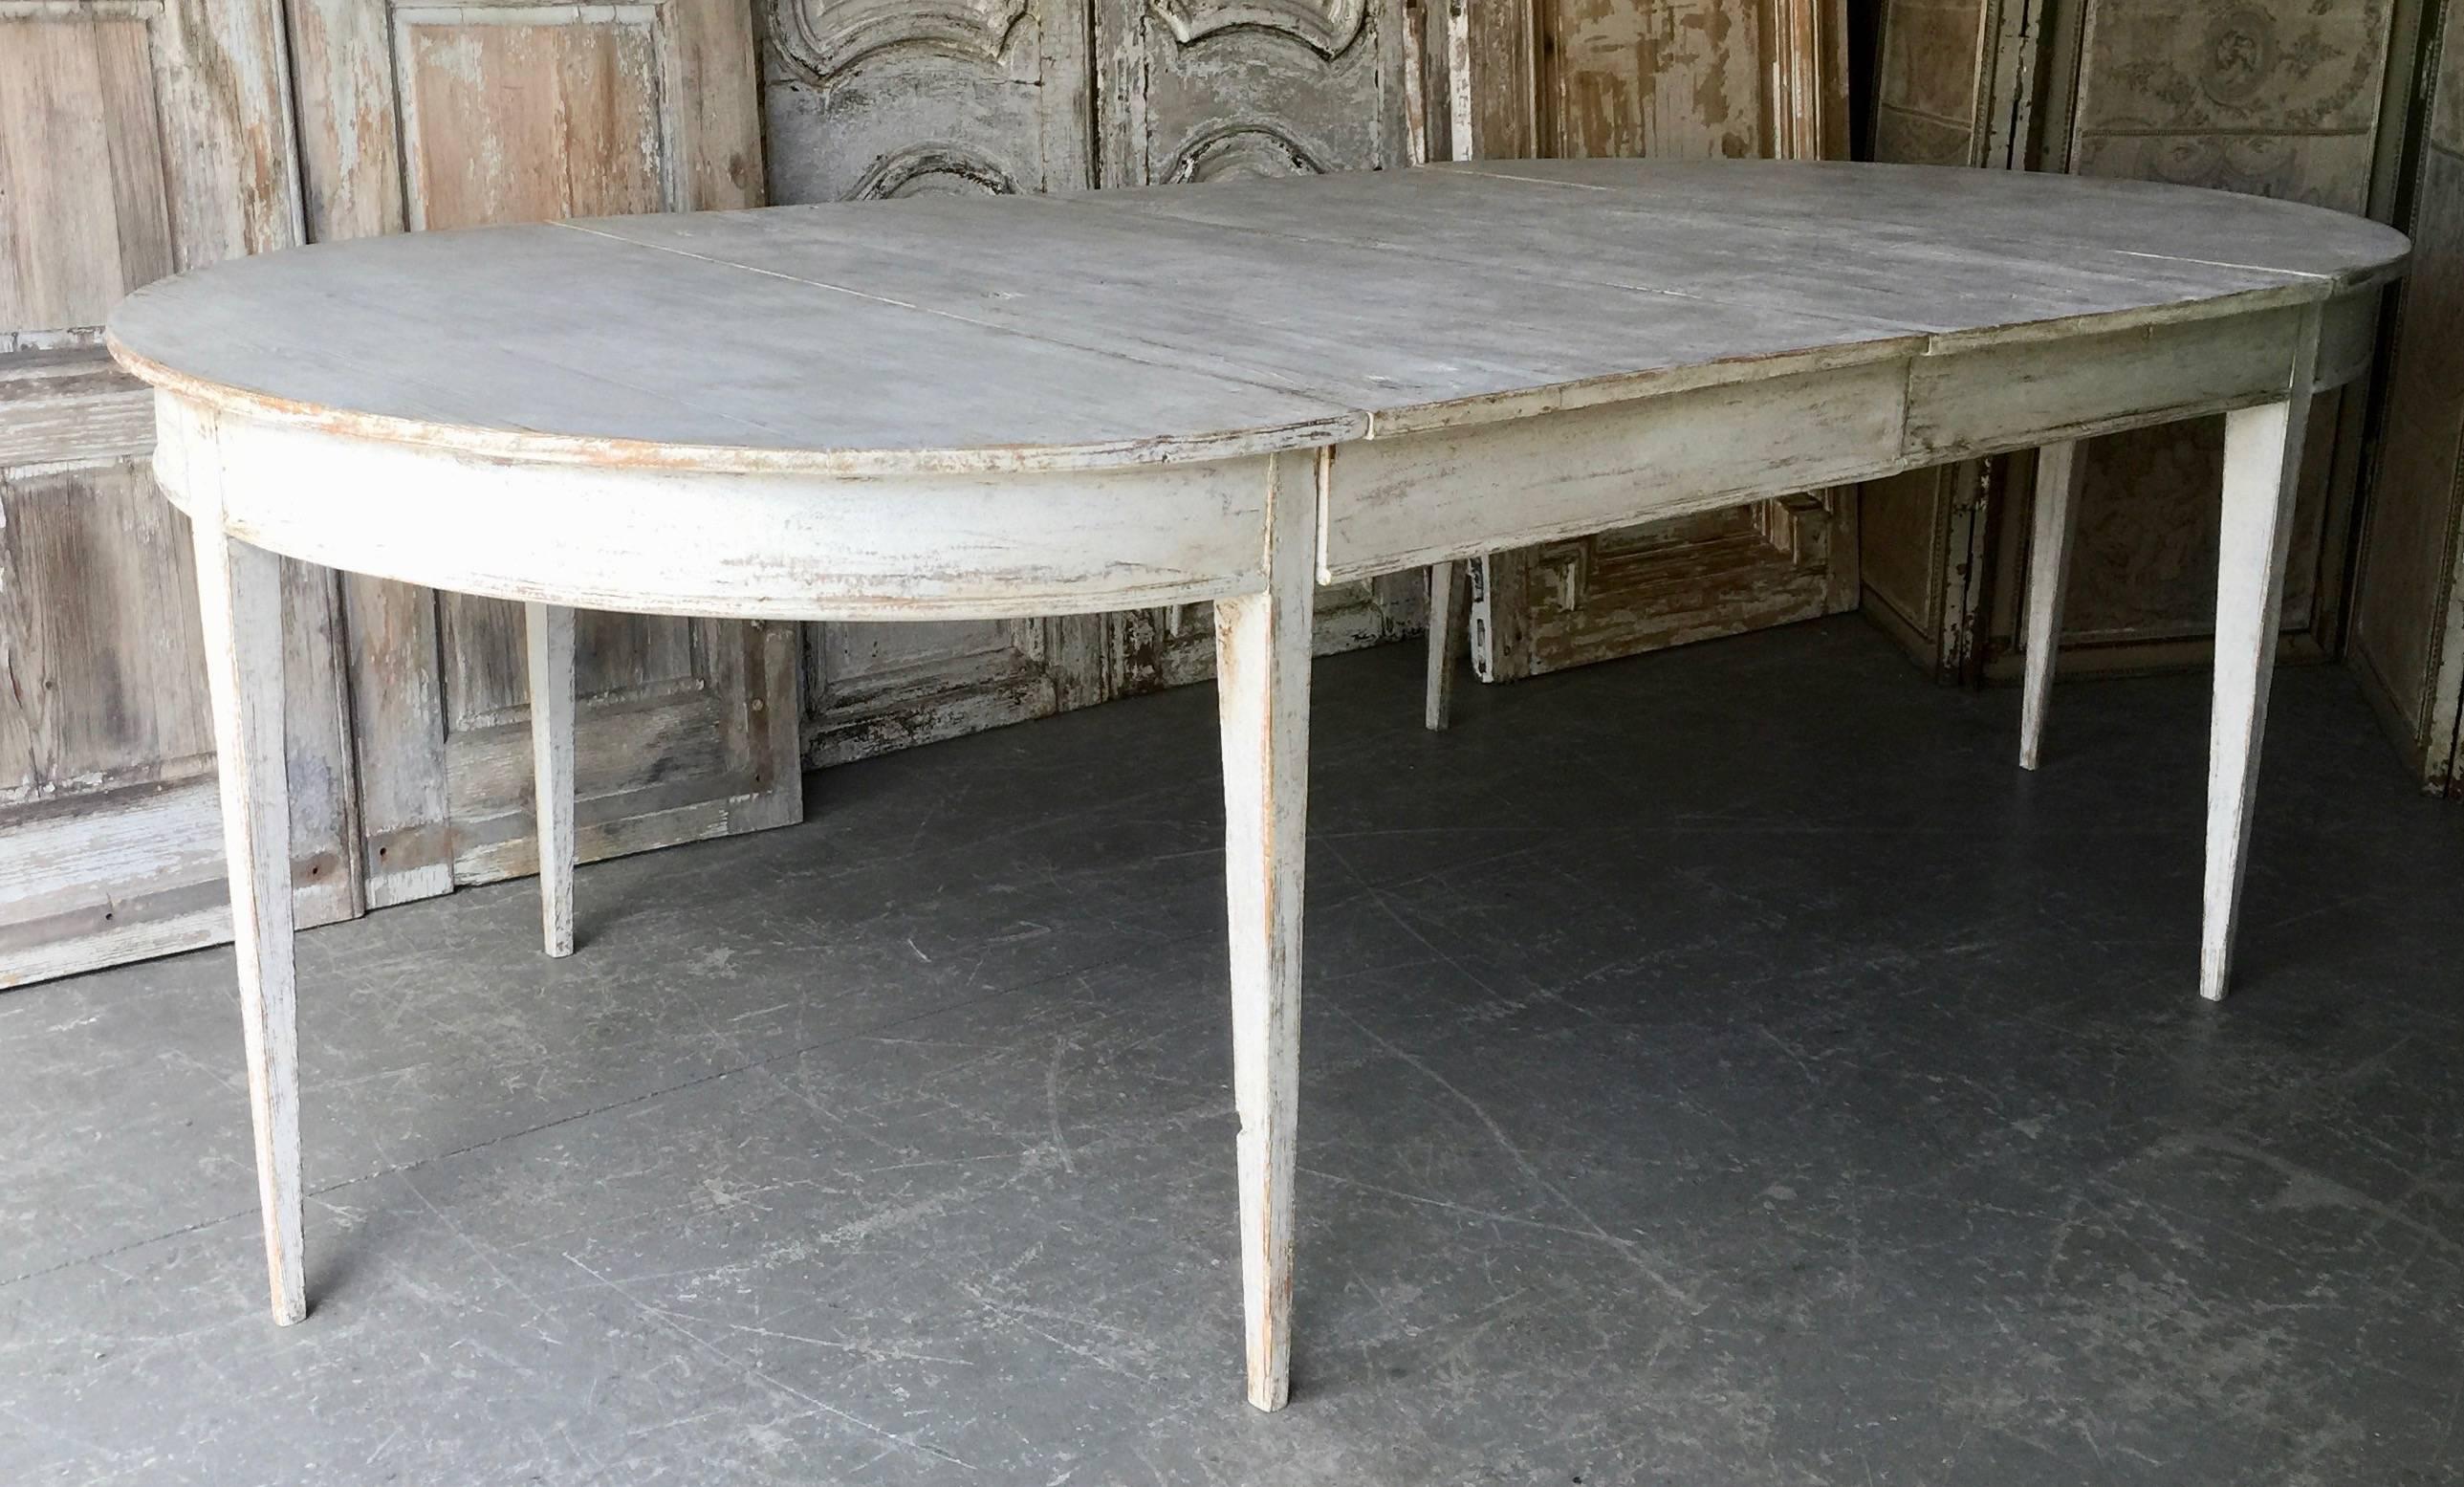 Early 19th century painted Gustavian period extending table with two original leaves and tapered legs. A practical piece that can be used as round table or extended with one or two leaves up to 93.75 long,
Stockholm, Sweden, circa